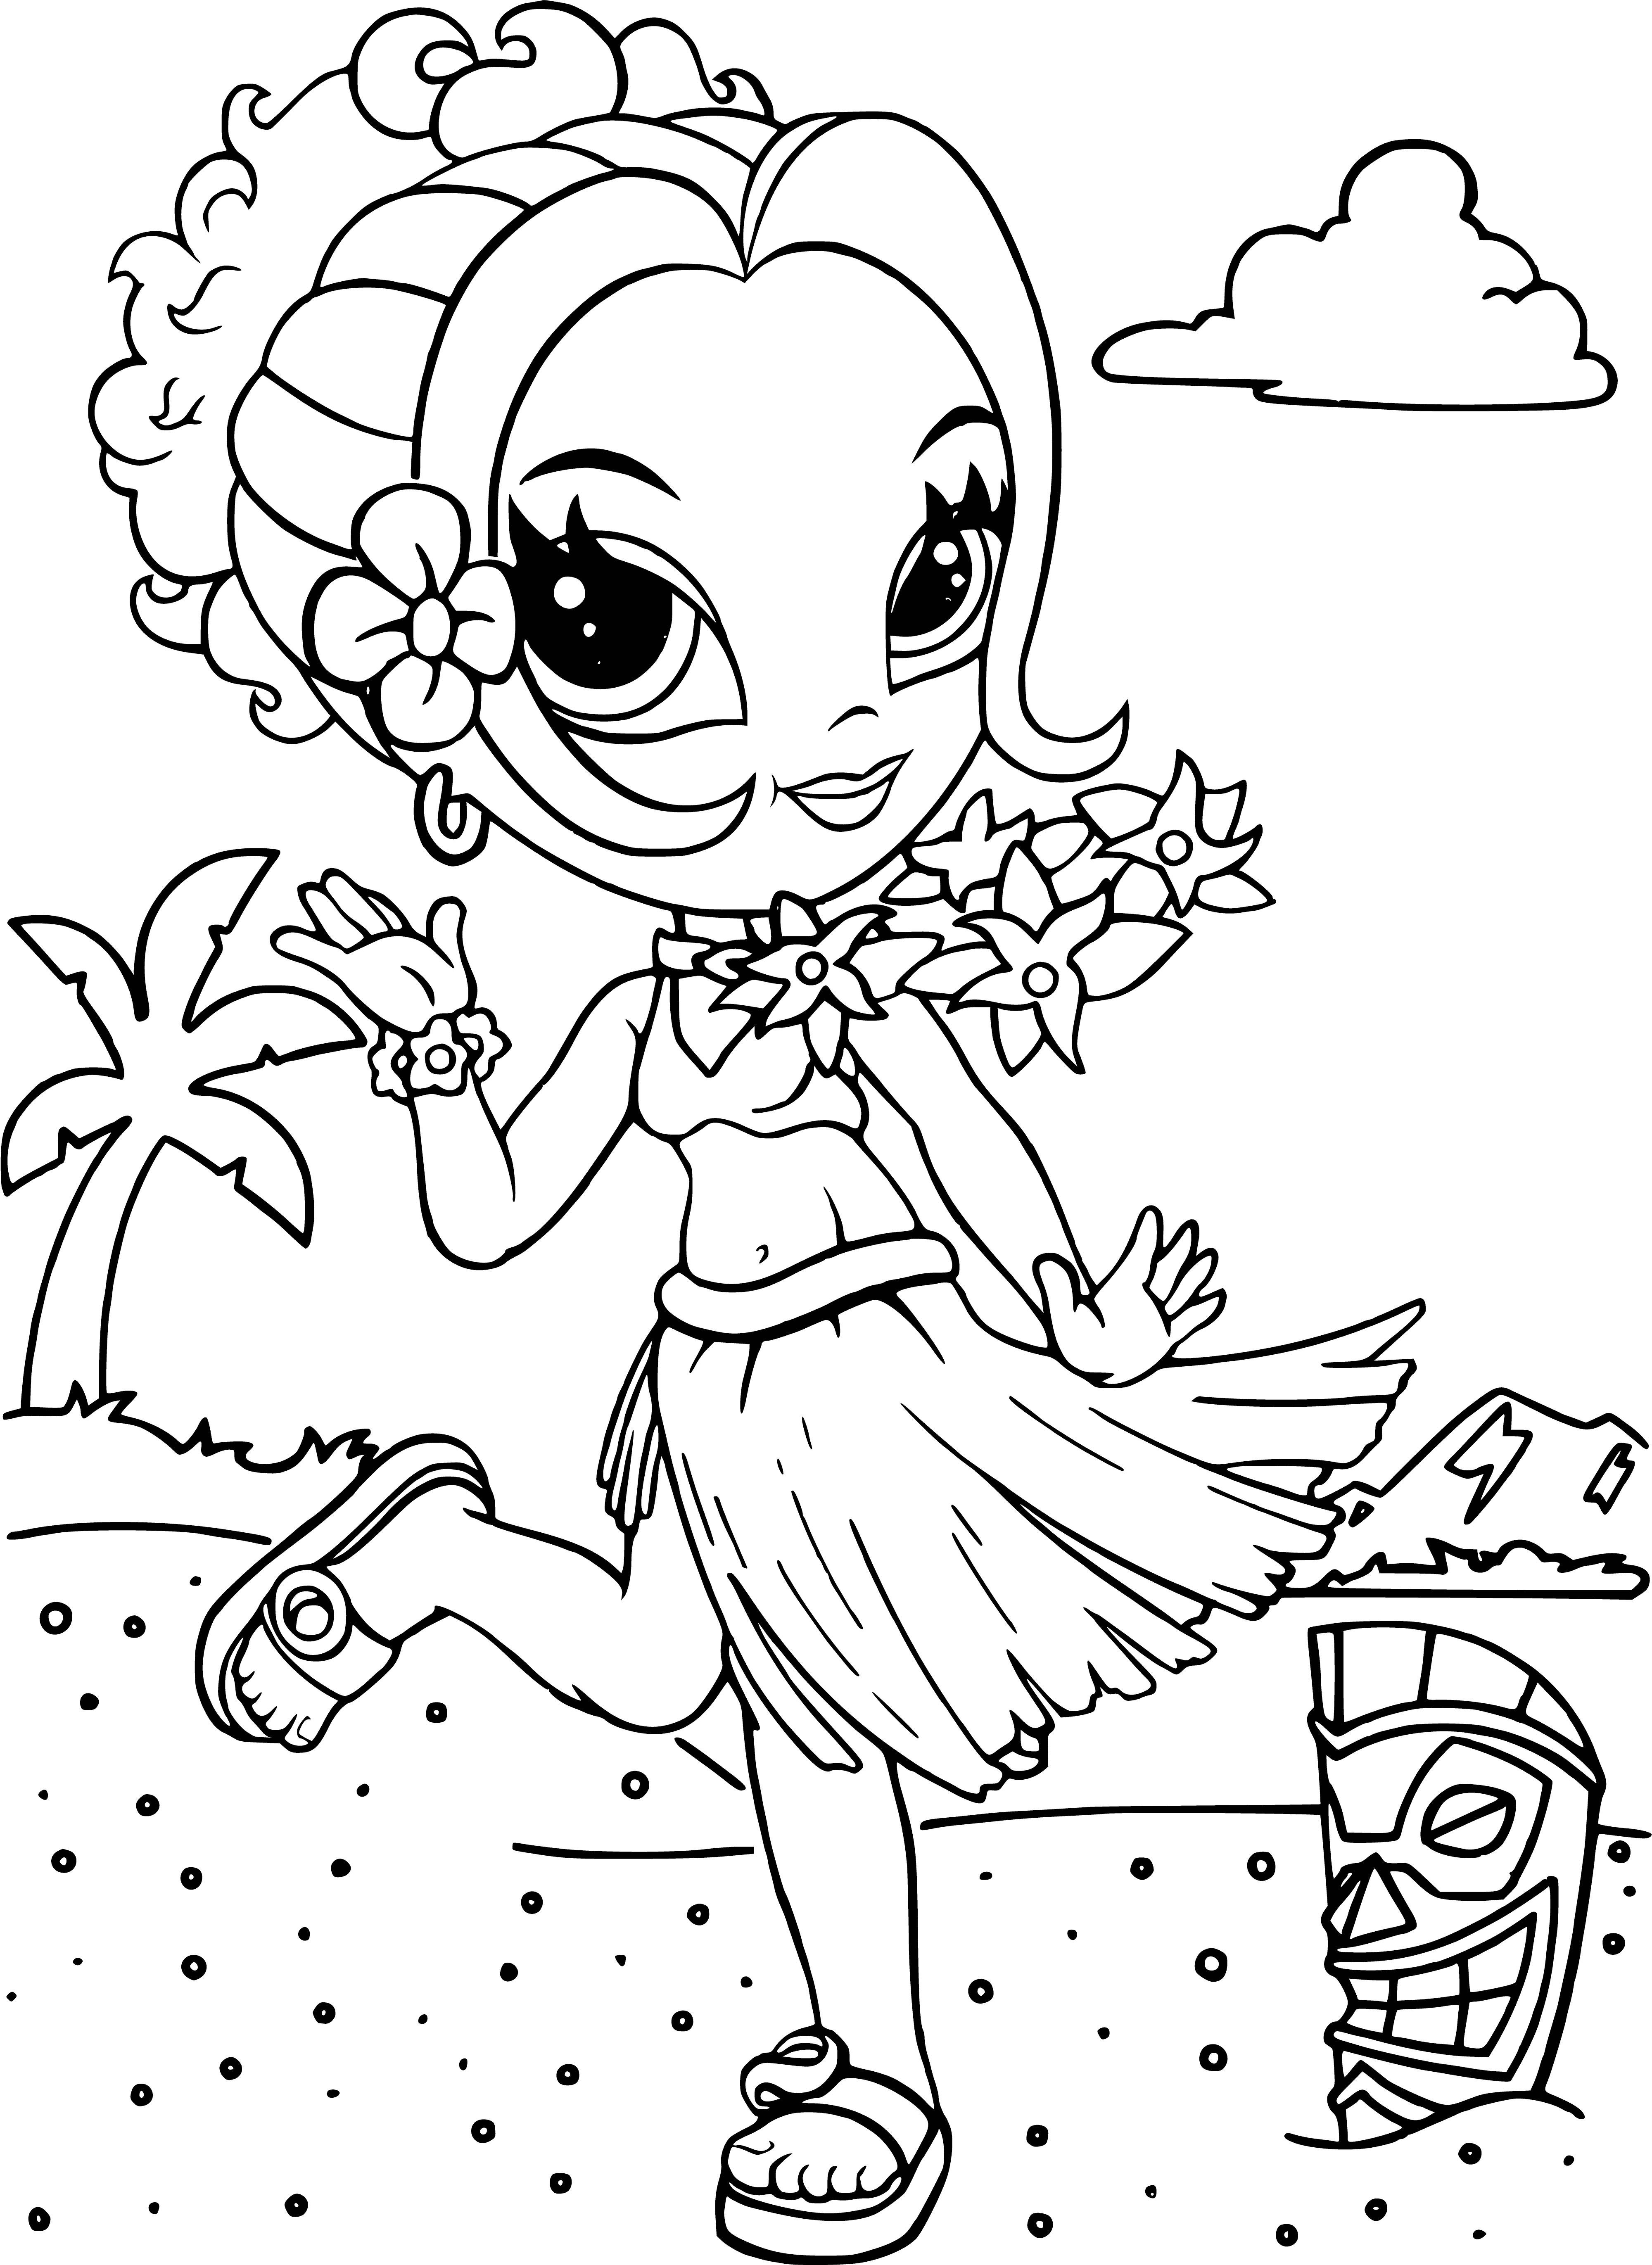 coloring page: Glam girl with long blonde hair, pink dress, fur stole & pink feathered boa. Seated at vanity in heels, purse on chair next to her.